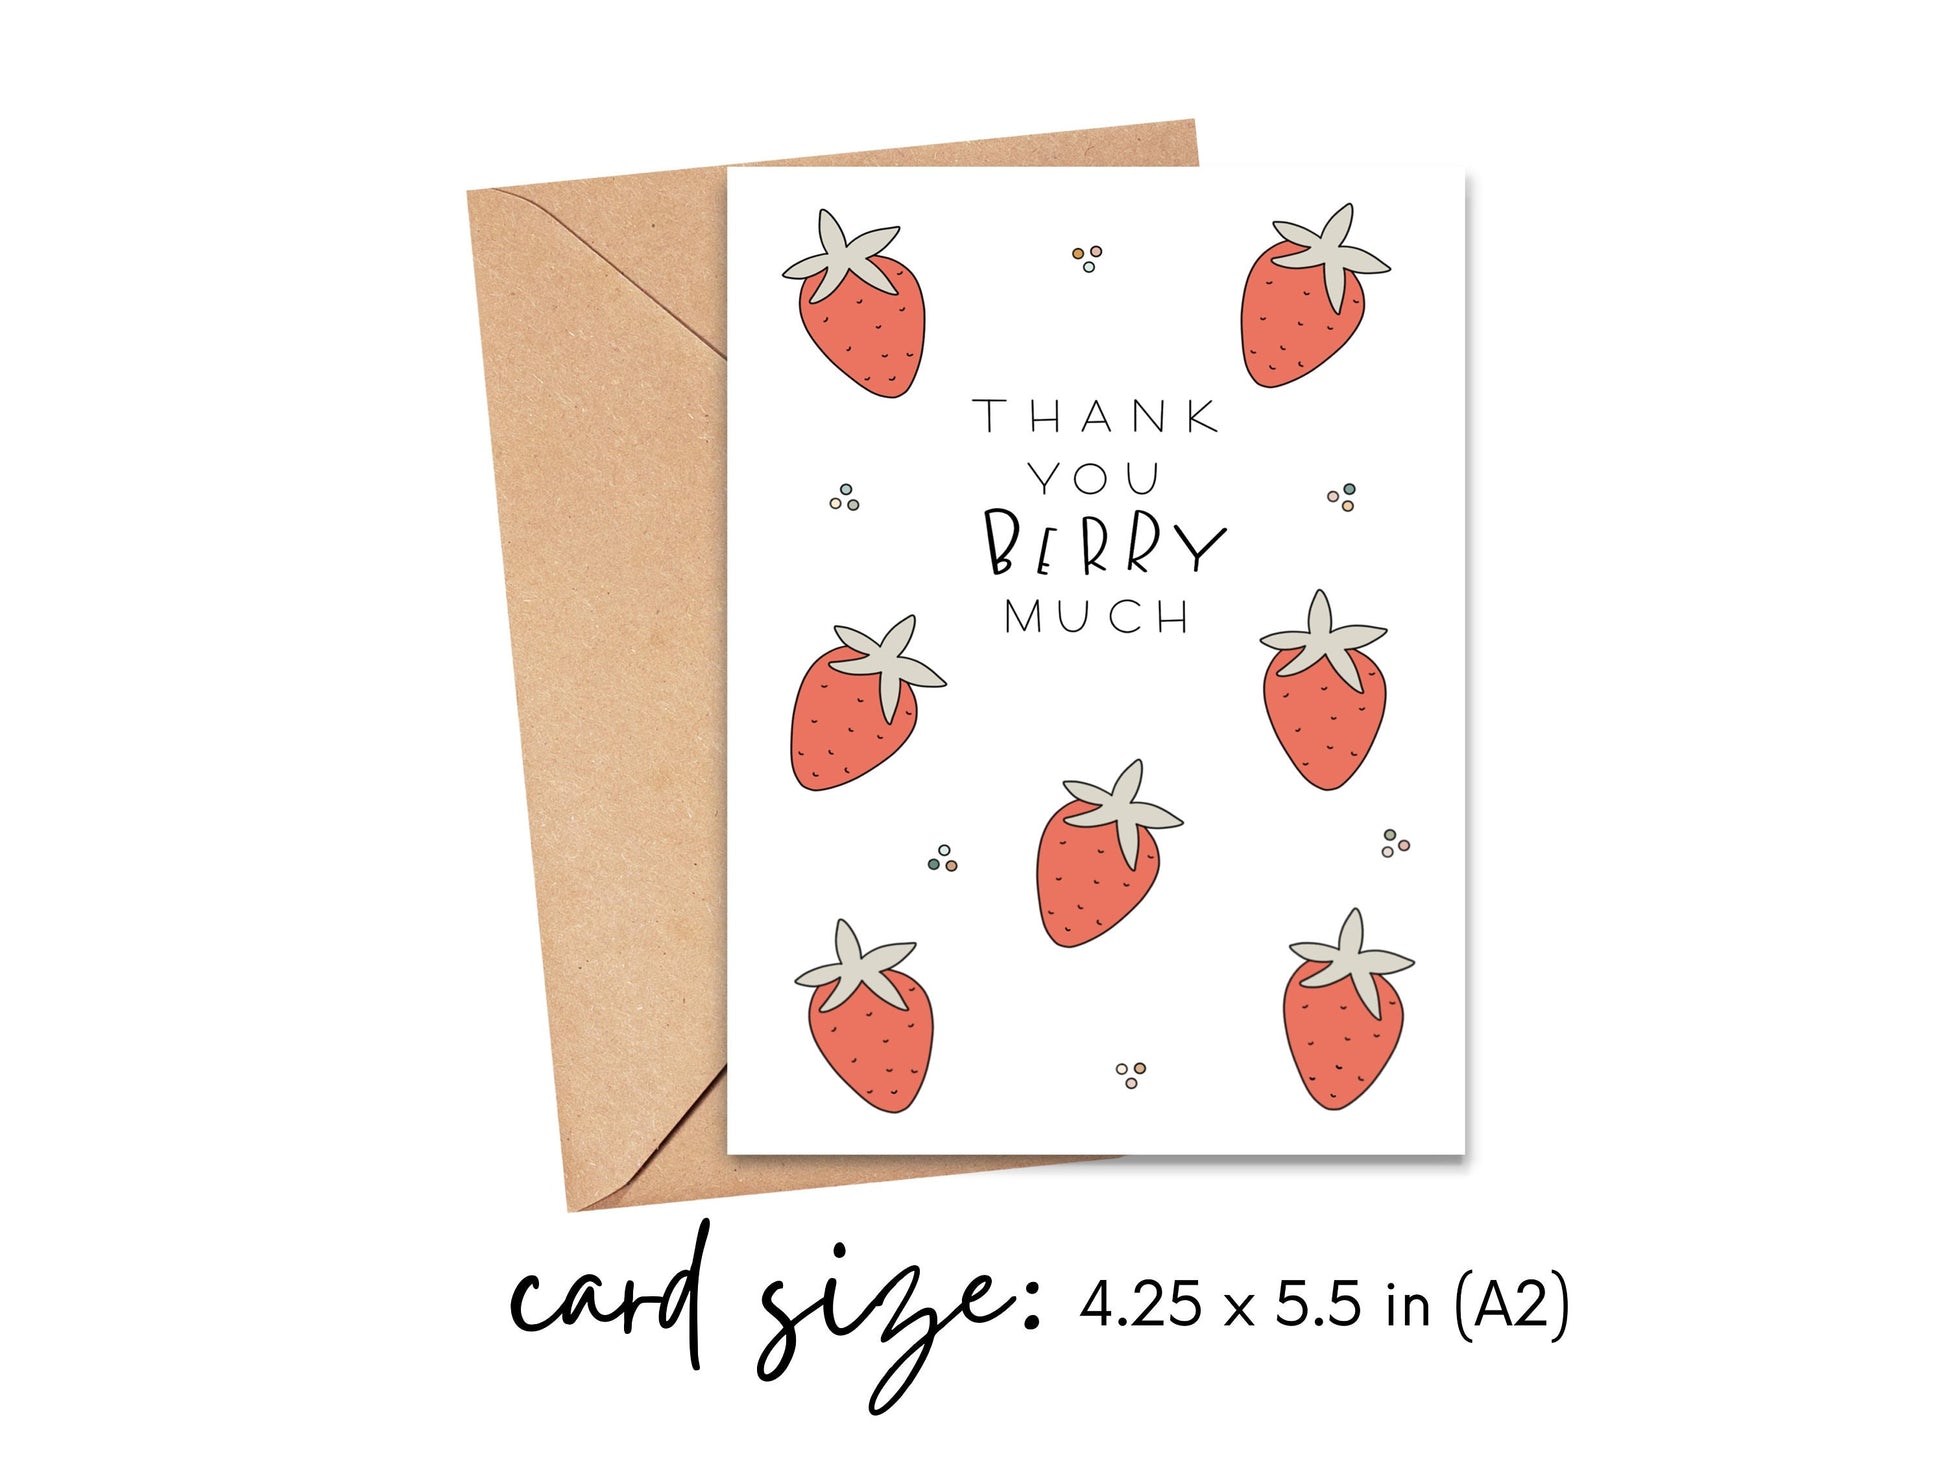 Thank You Berry Much Card Simply Happy Cards